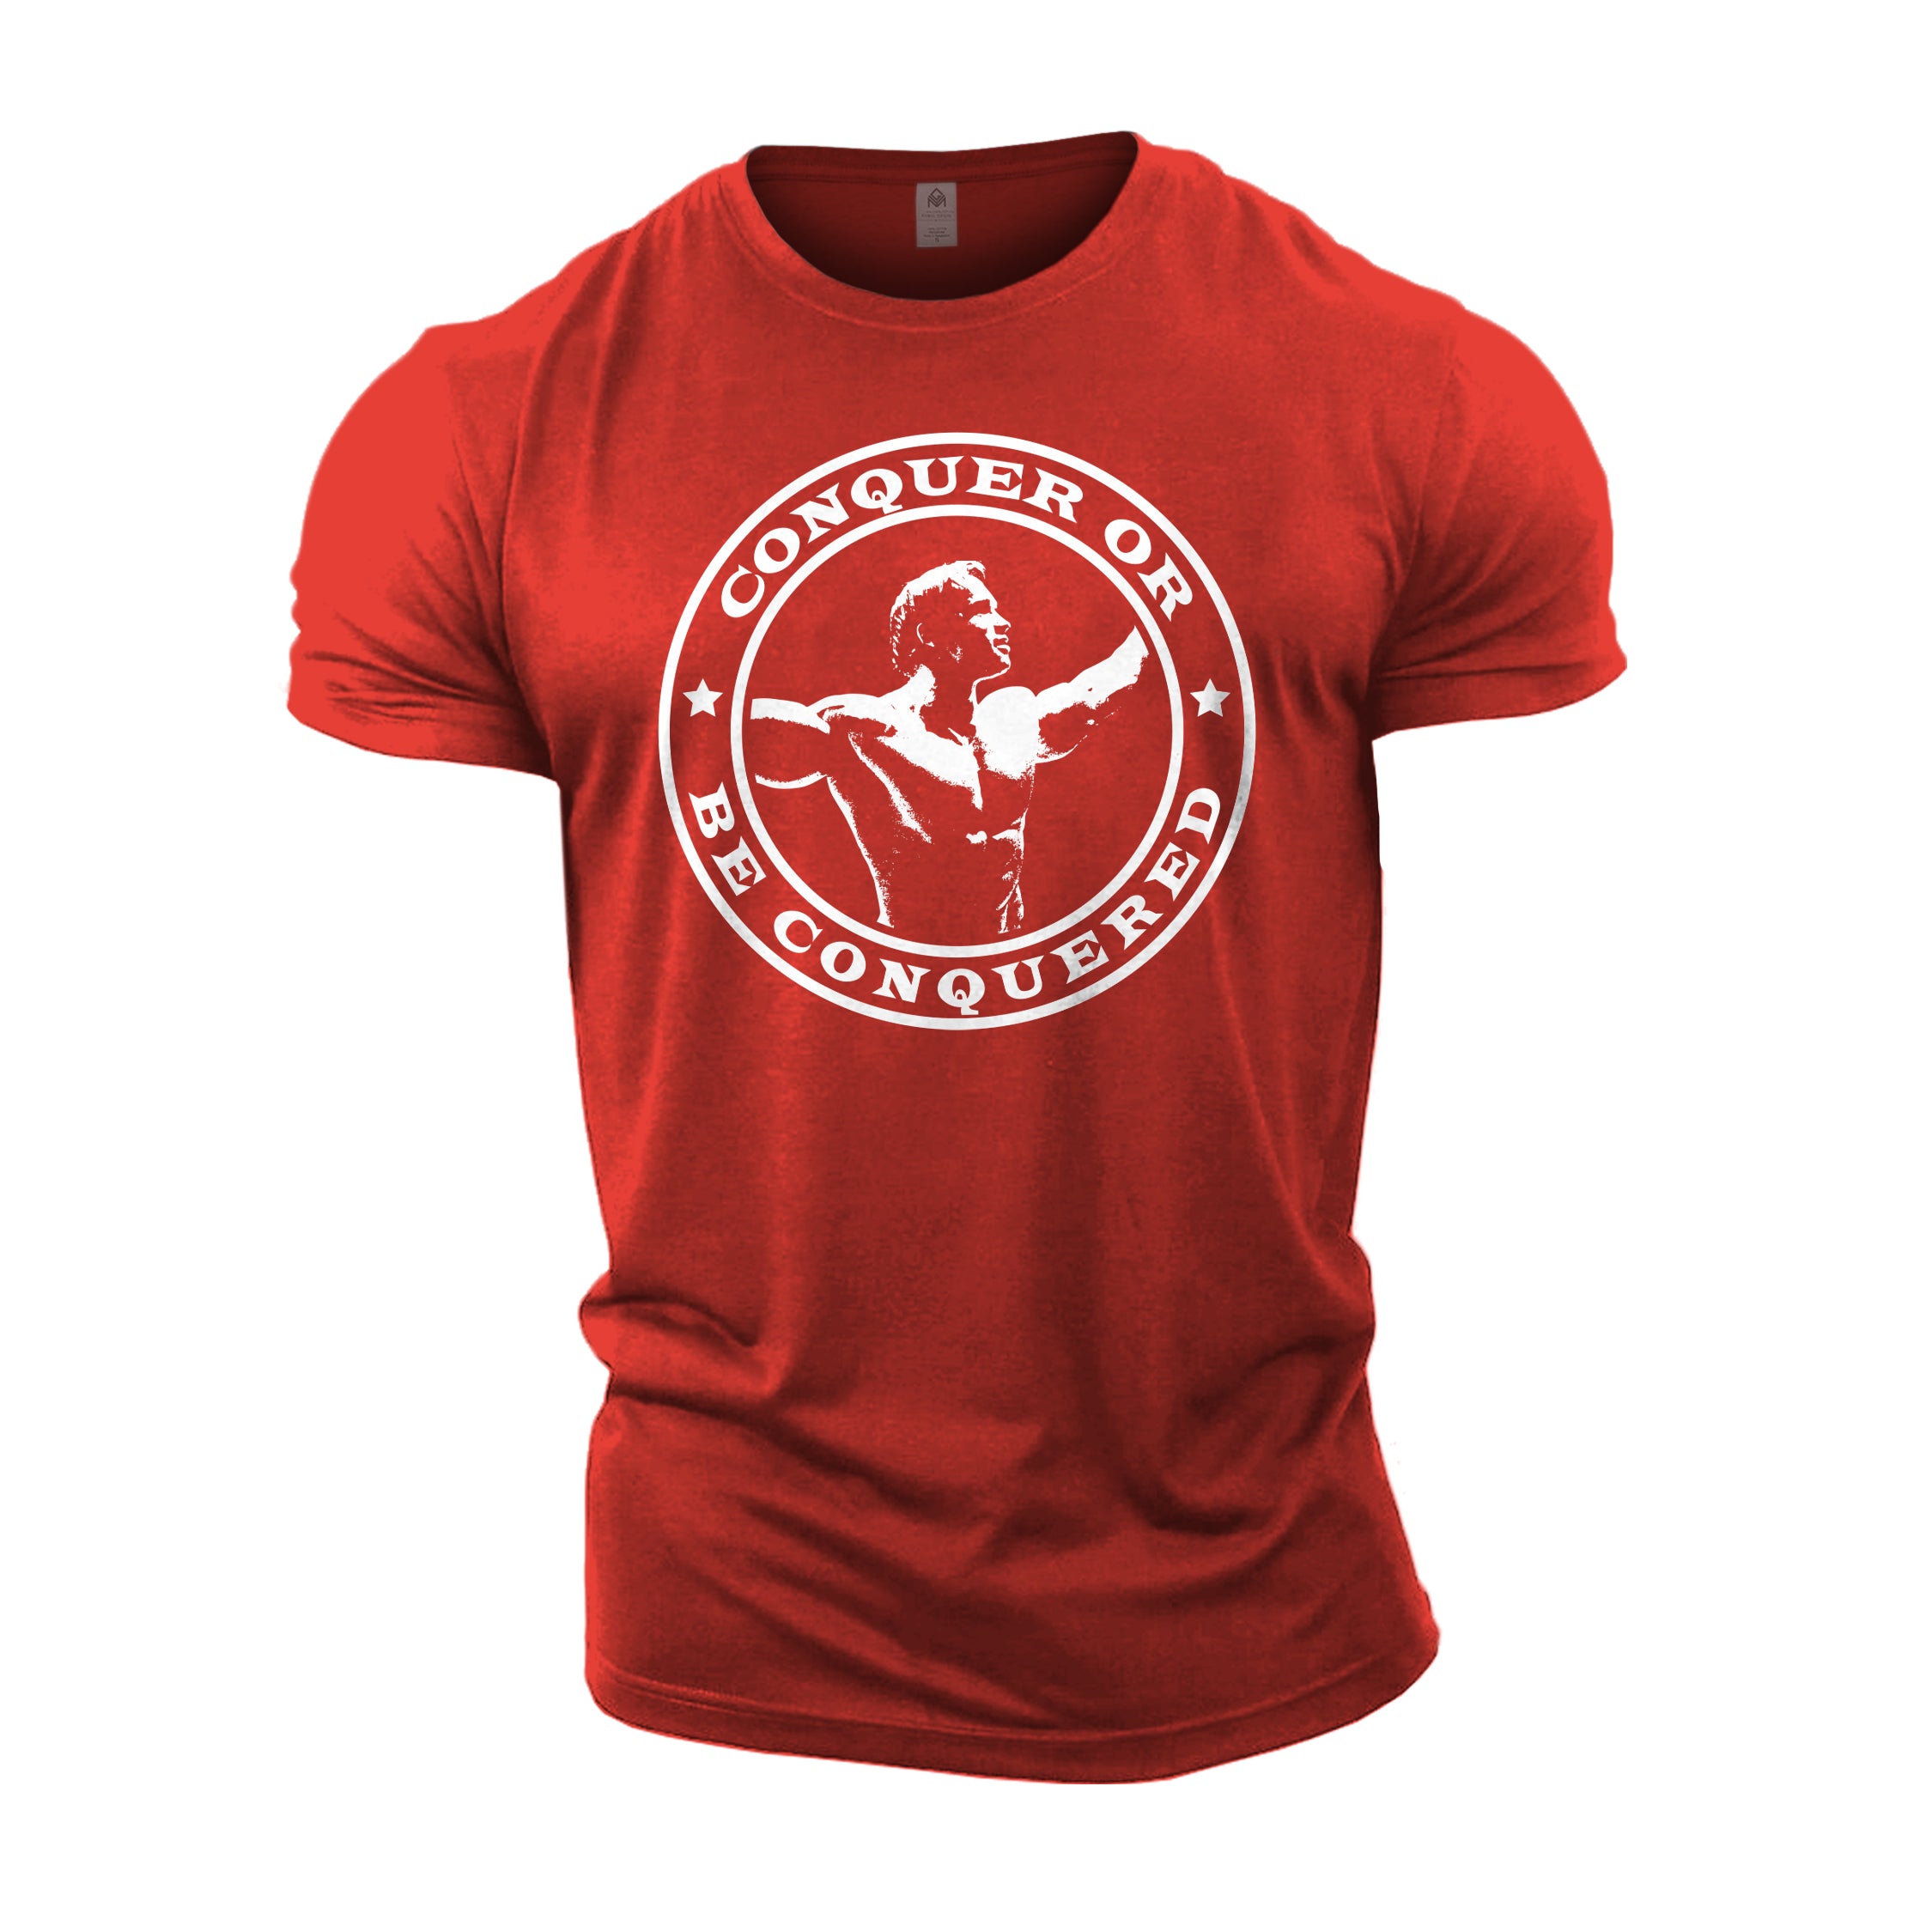 Conquer or be Conquered - Gym T-Shirt